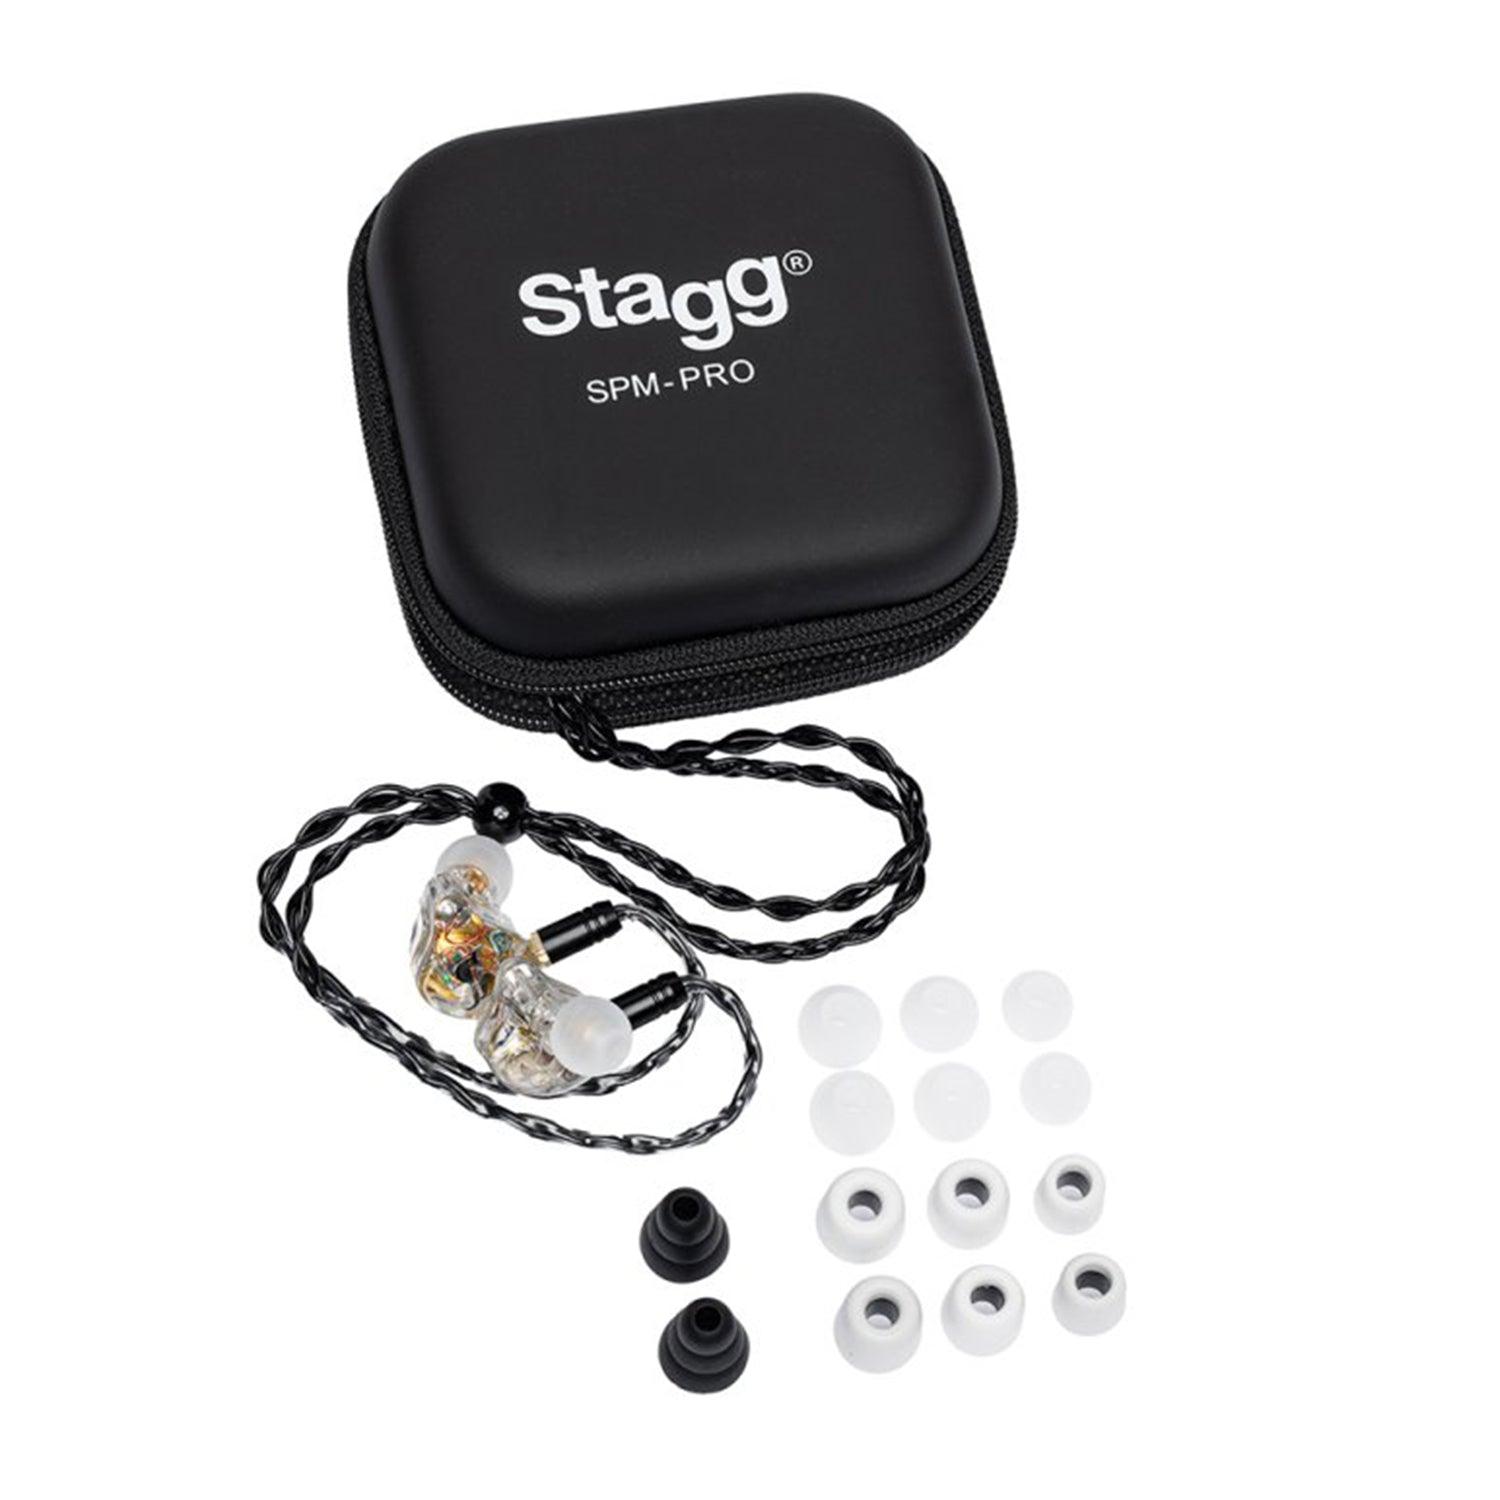 Stagg SPM-PRO TR Clear Superior In Ear IEM Earphones with Premium Hybrid Transducers - DY Pro Audio